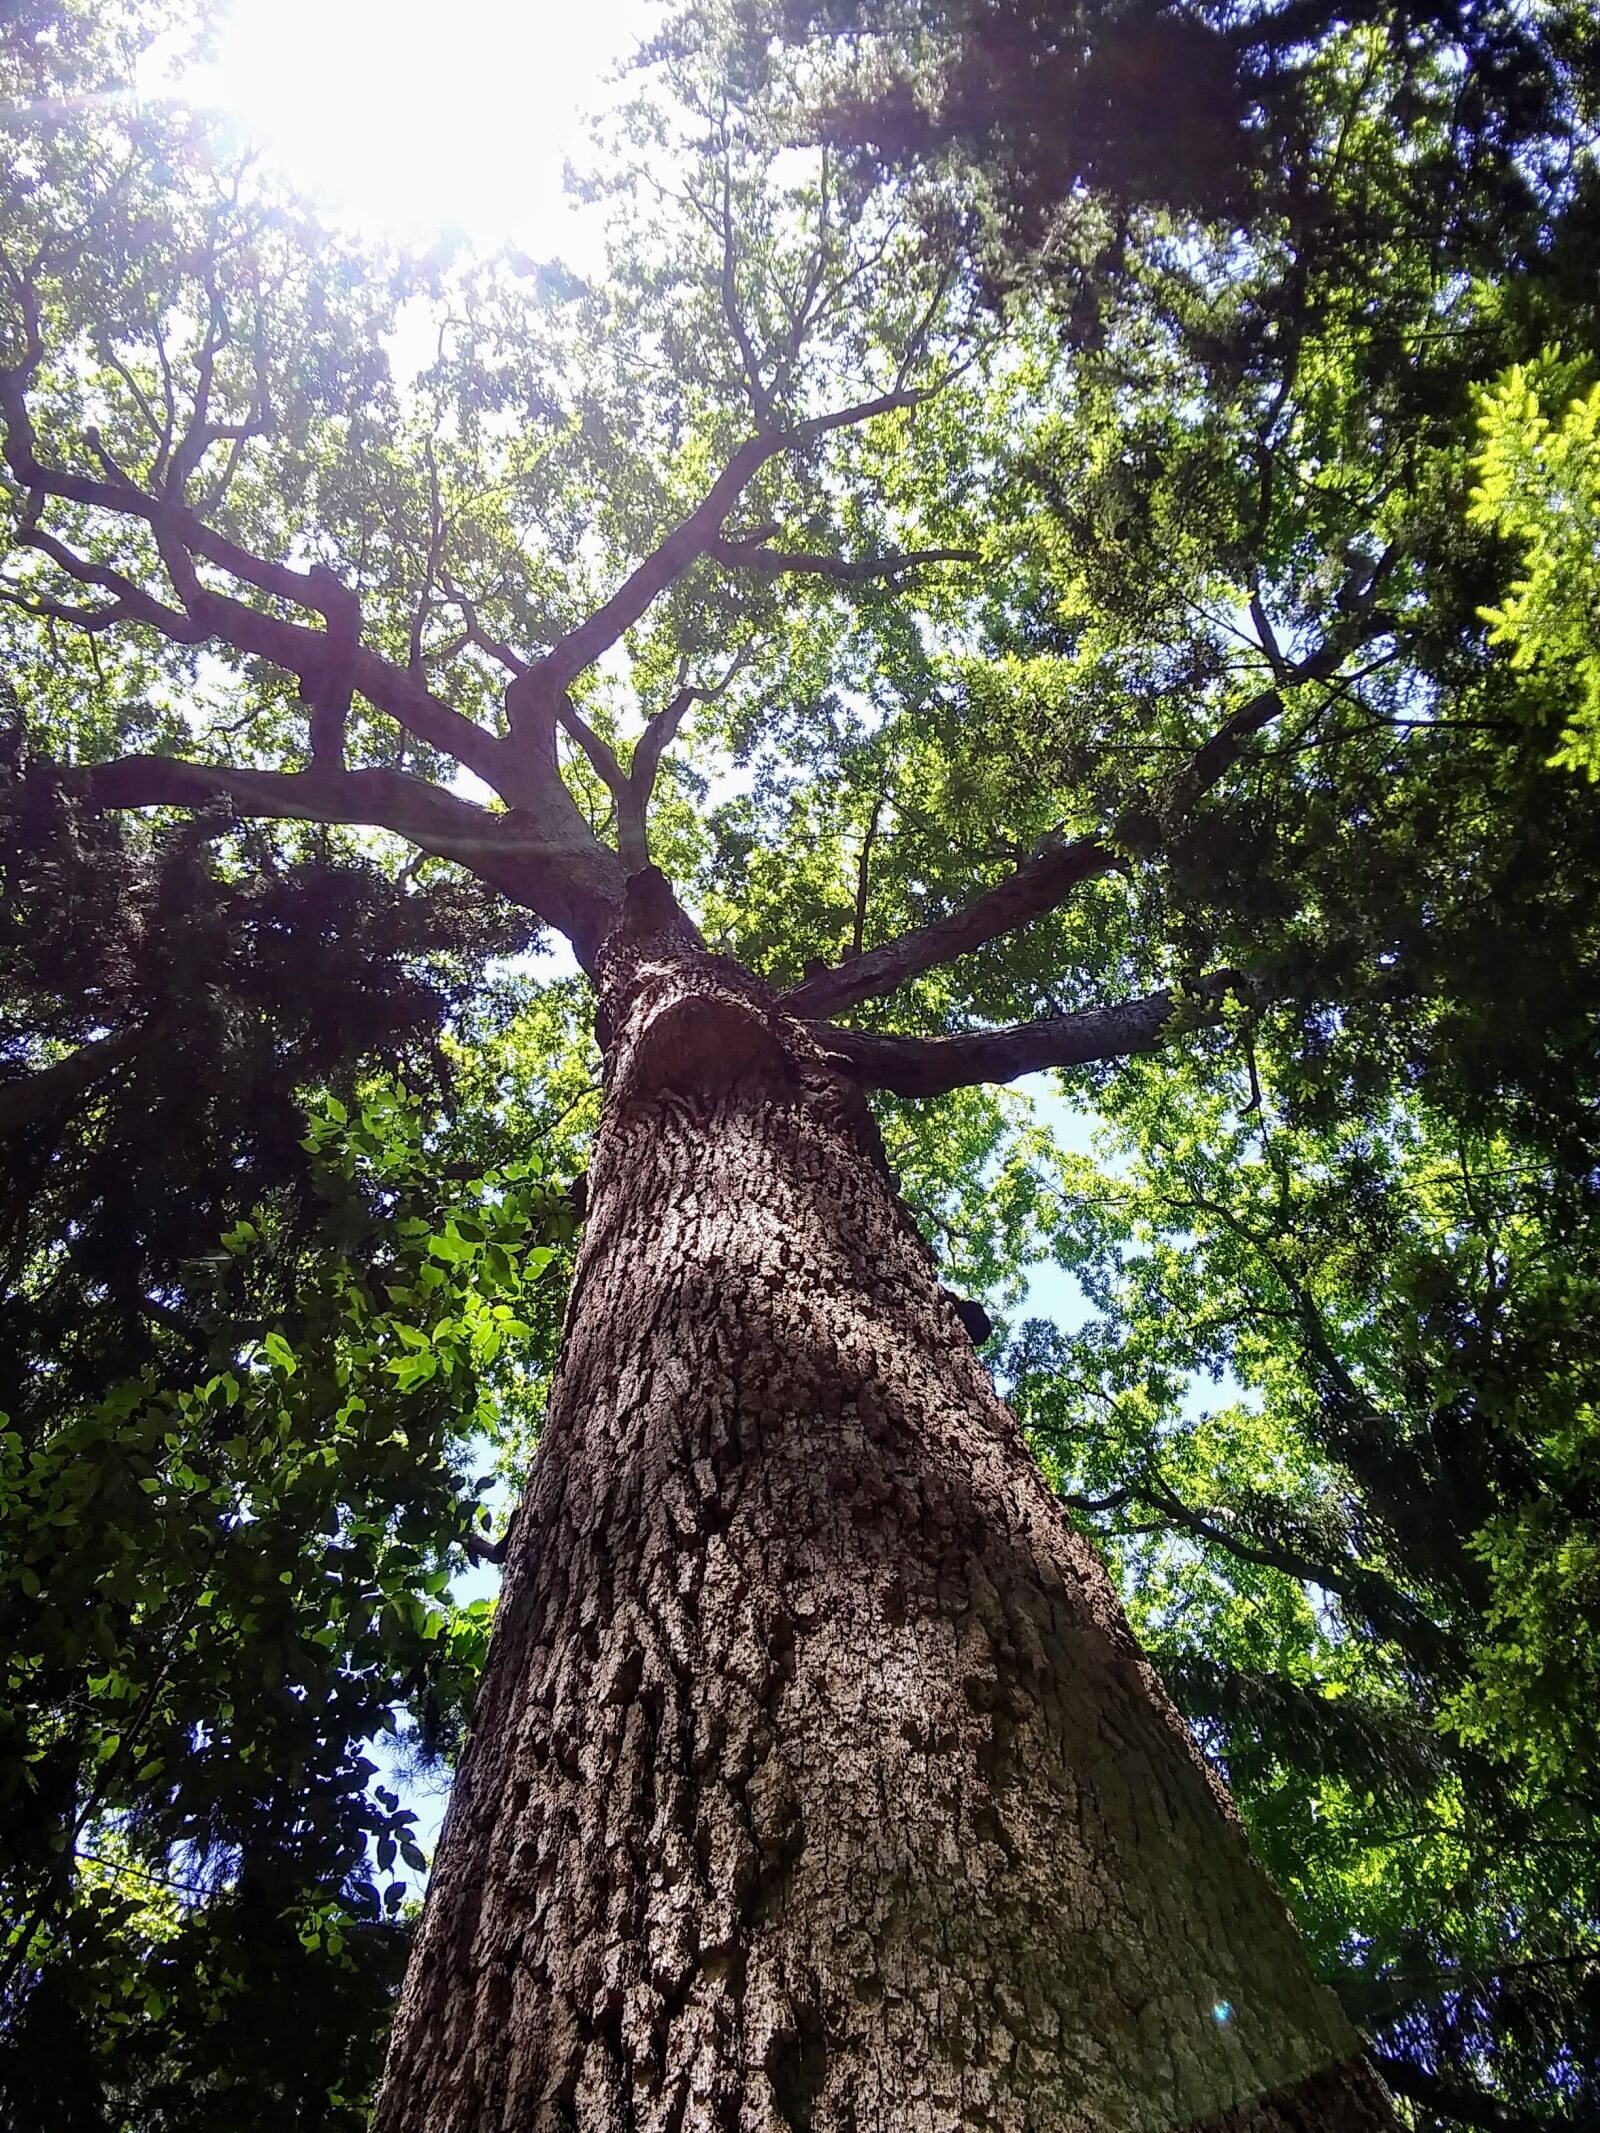 LG K8(2018) sample photo. Tall tree, sunlight, forest photography